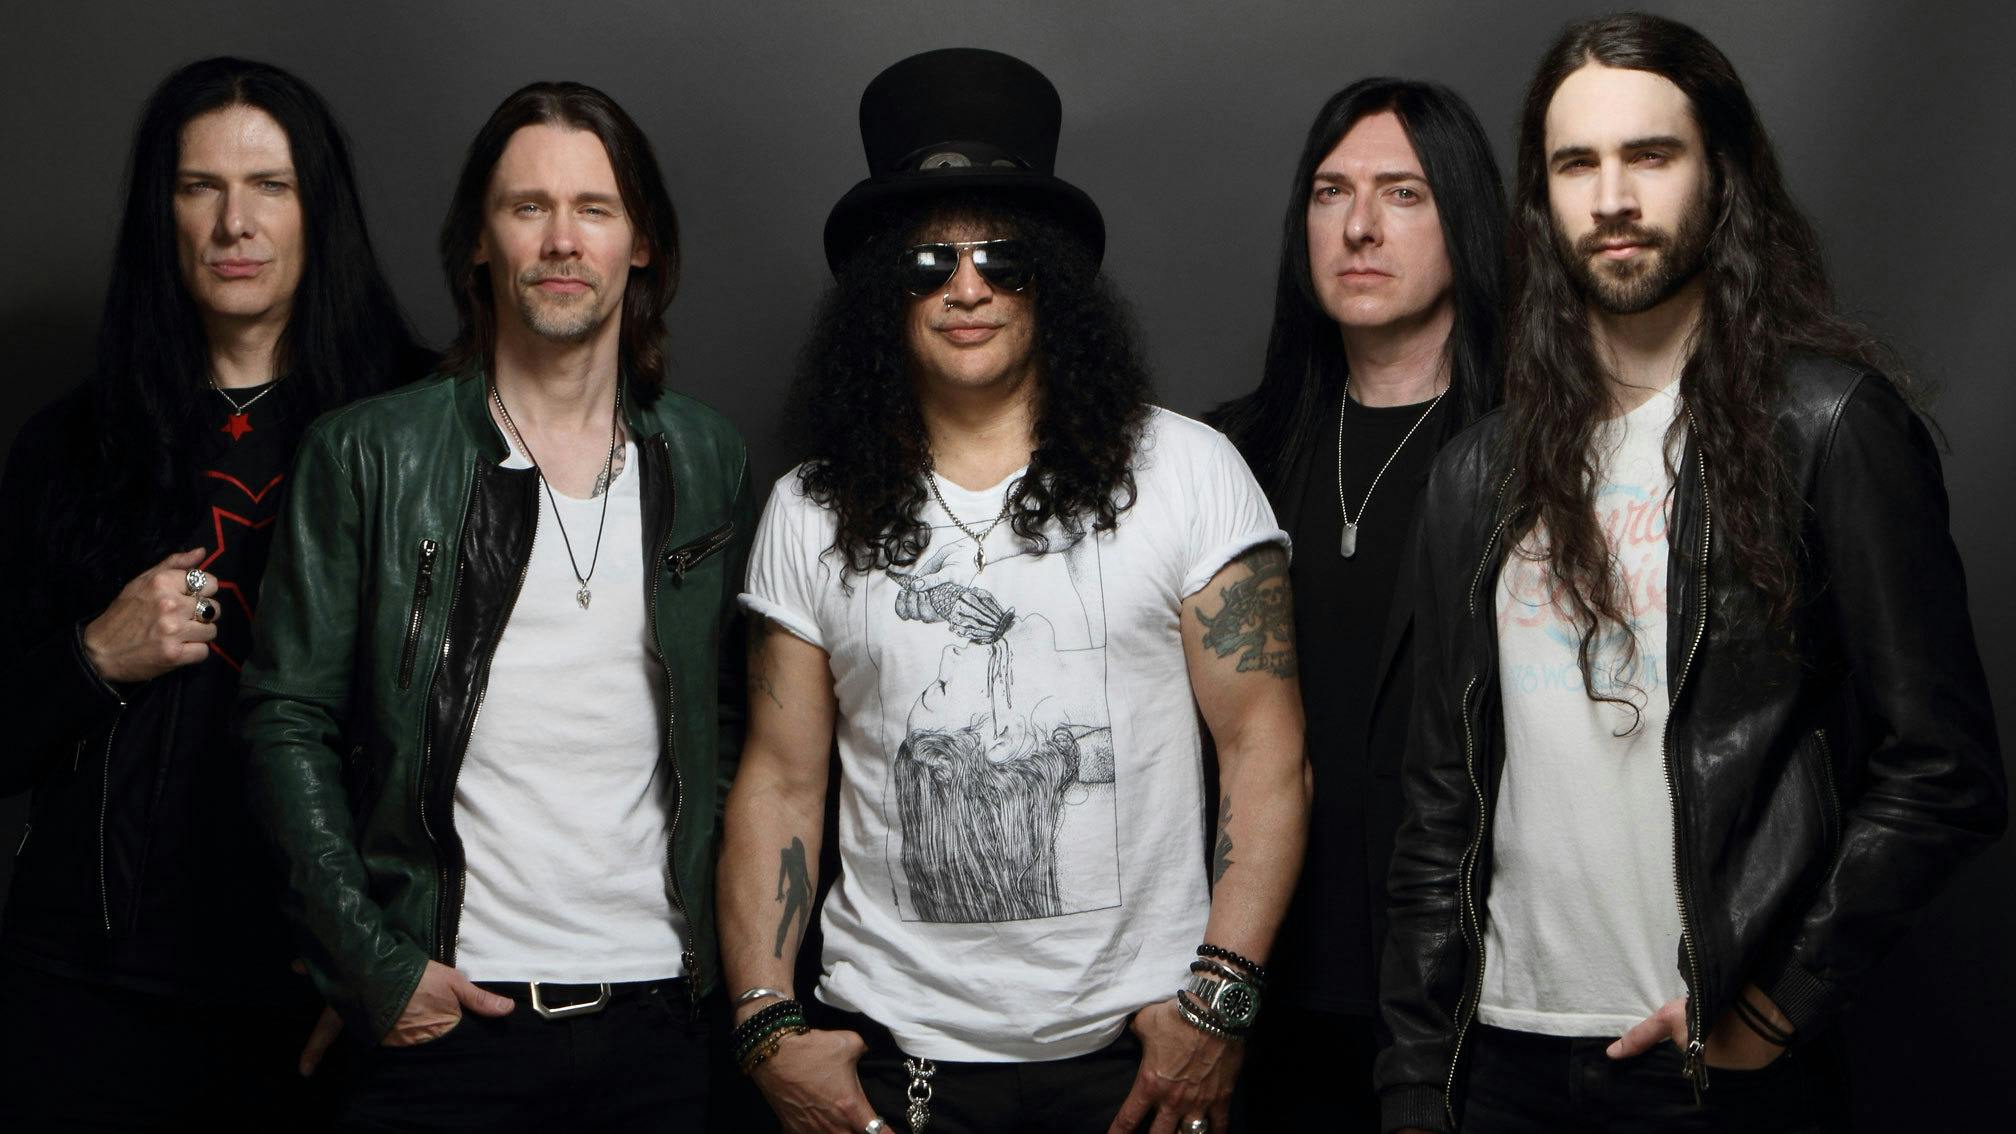 Slash featuring Myles Kennedy & The Conspirators announce new single, The River Is Rising